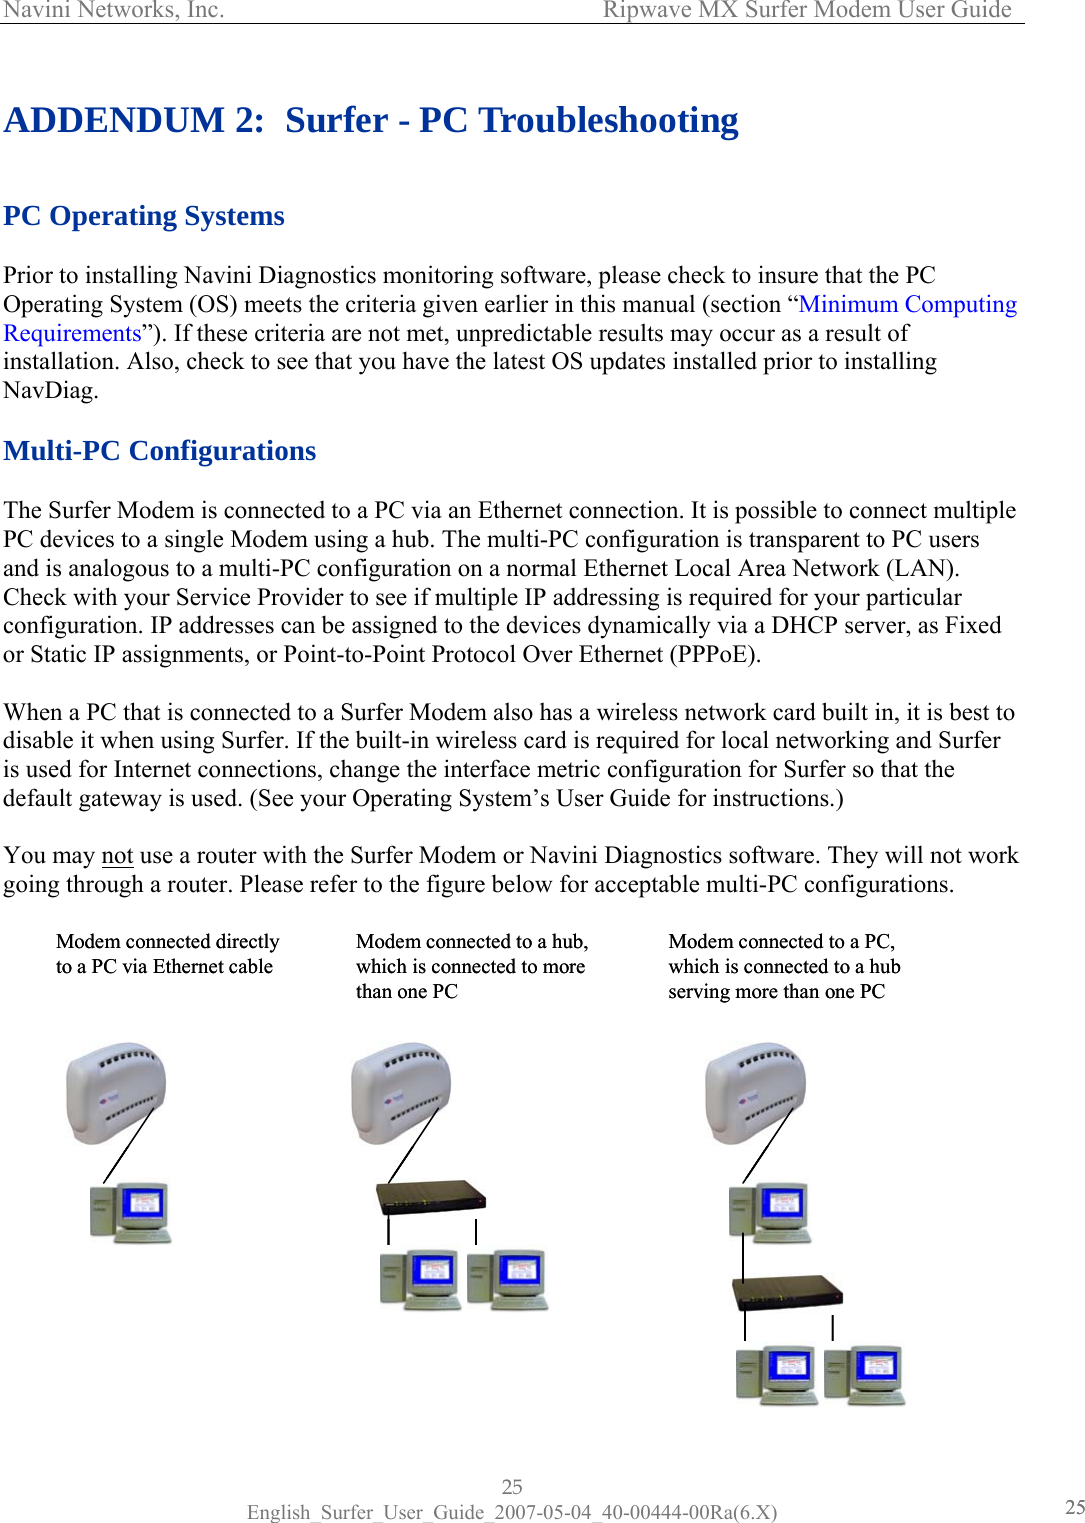 Navini Networks, Inc.      Ripwave MX Surfer Modem User Guide 25 English_Surfer_User_Guide_2007-05-04_40-00444-00Ra(6.X) 2525 ADDENDUM 2:  Surfer - PC Troubleshooting   PC Operating Systems  Prior to installing Navini Diagnostics monitoring software, please check to insure that the PC Operating System (OS) meets the criteria given earlier in this manual (section “Minimum Computing Requirements”). If these criteria are not met, unpredictable results may occur as a result of installation. Also, check to see that you have the latest OS updates installed prior to installing NavDiag.  Multi-PC Configurations  The Surfer Modem is connected to a PC via an Ethernet connection. It is possible to connect multiple PC devices to a single Modem using a hub. The multi-PC configuration is transparent to PC users and is analogous to a multi-PC configuration on a normal Ethernet Local Area Network (LAN). Check with your Service Provider to see if multiple IP addressing is required for your particular configuration. IP addresses can be assigned to the devices dynamically via a DHCP server, as Fixed or Static IP assignments, or Point-to-Point Protocol Over Ethernet (PPPoE).  When a PC that is connected to a Surfer Modem also has a wireless network card built in, it is best to disable it when using Surfer. If the built-in wireless card is required for local networking and Surfer is used for Internet connections, change the interface metric configuration for Surfer so that the default gateway is used. (See your Operating System’s User Guide for instructions.)  You may not use a router with the Surfer Modem or Navini Diagnostics software. They will not work going through a router. Please refer to the figure below for acceptable multi-PC configurations.                  Modem connected directlyto a PC via Ethernet cableModem connected to a hub,which is connected to morethan one PCModem connected to a PC,which is connected to a hubserving more than one PCModem connected directlyto a PC via Ethernet cableModem connected to a hub,which is connected to morethan one PCModem connected to a PC,which is connected to a hubserving more than one PC